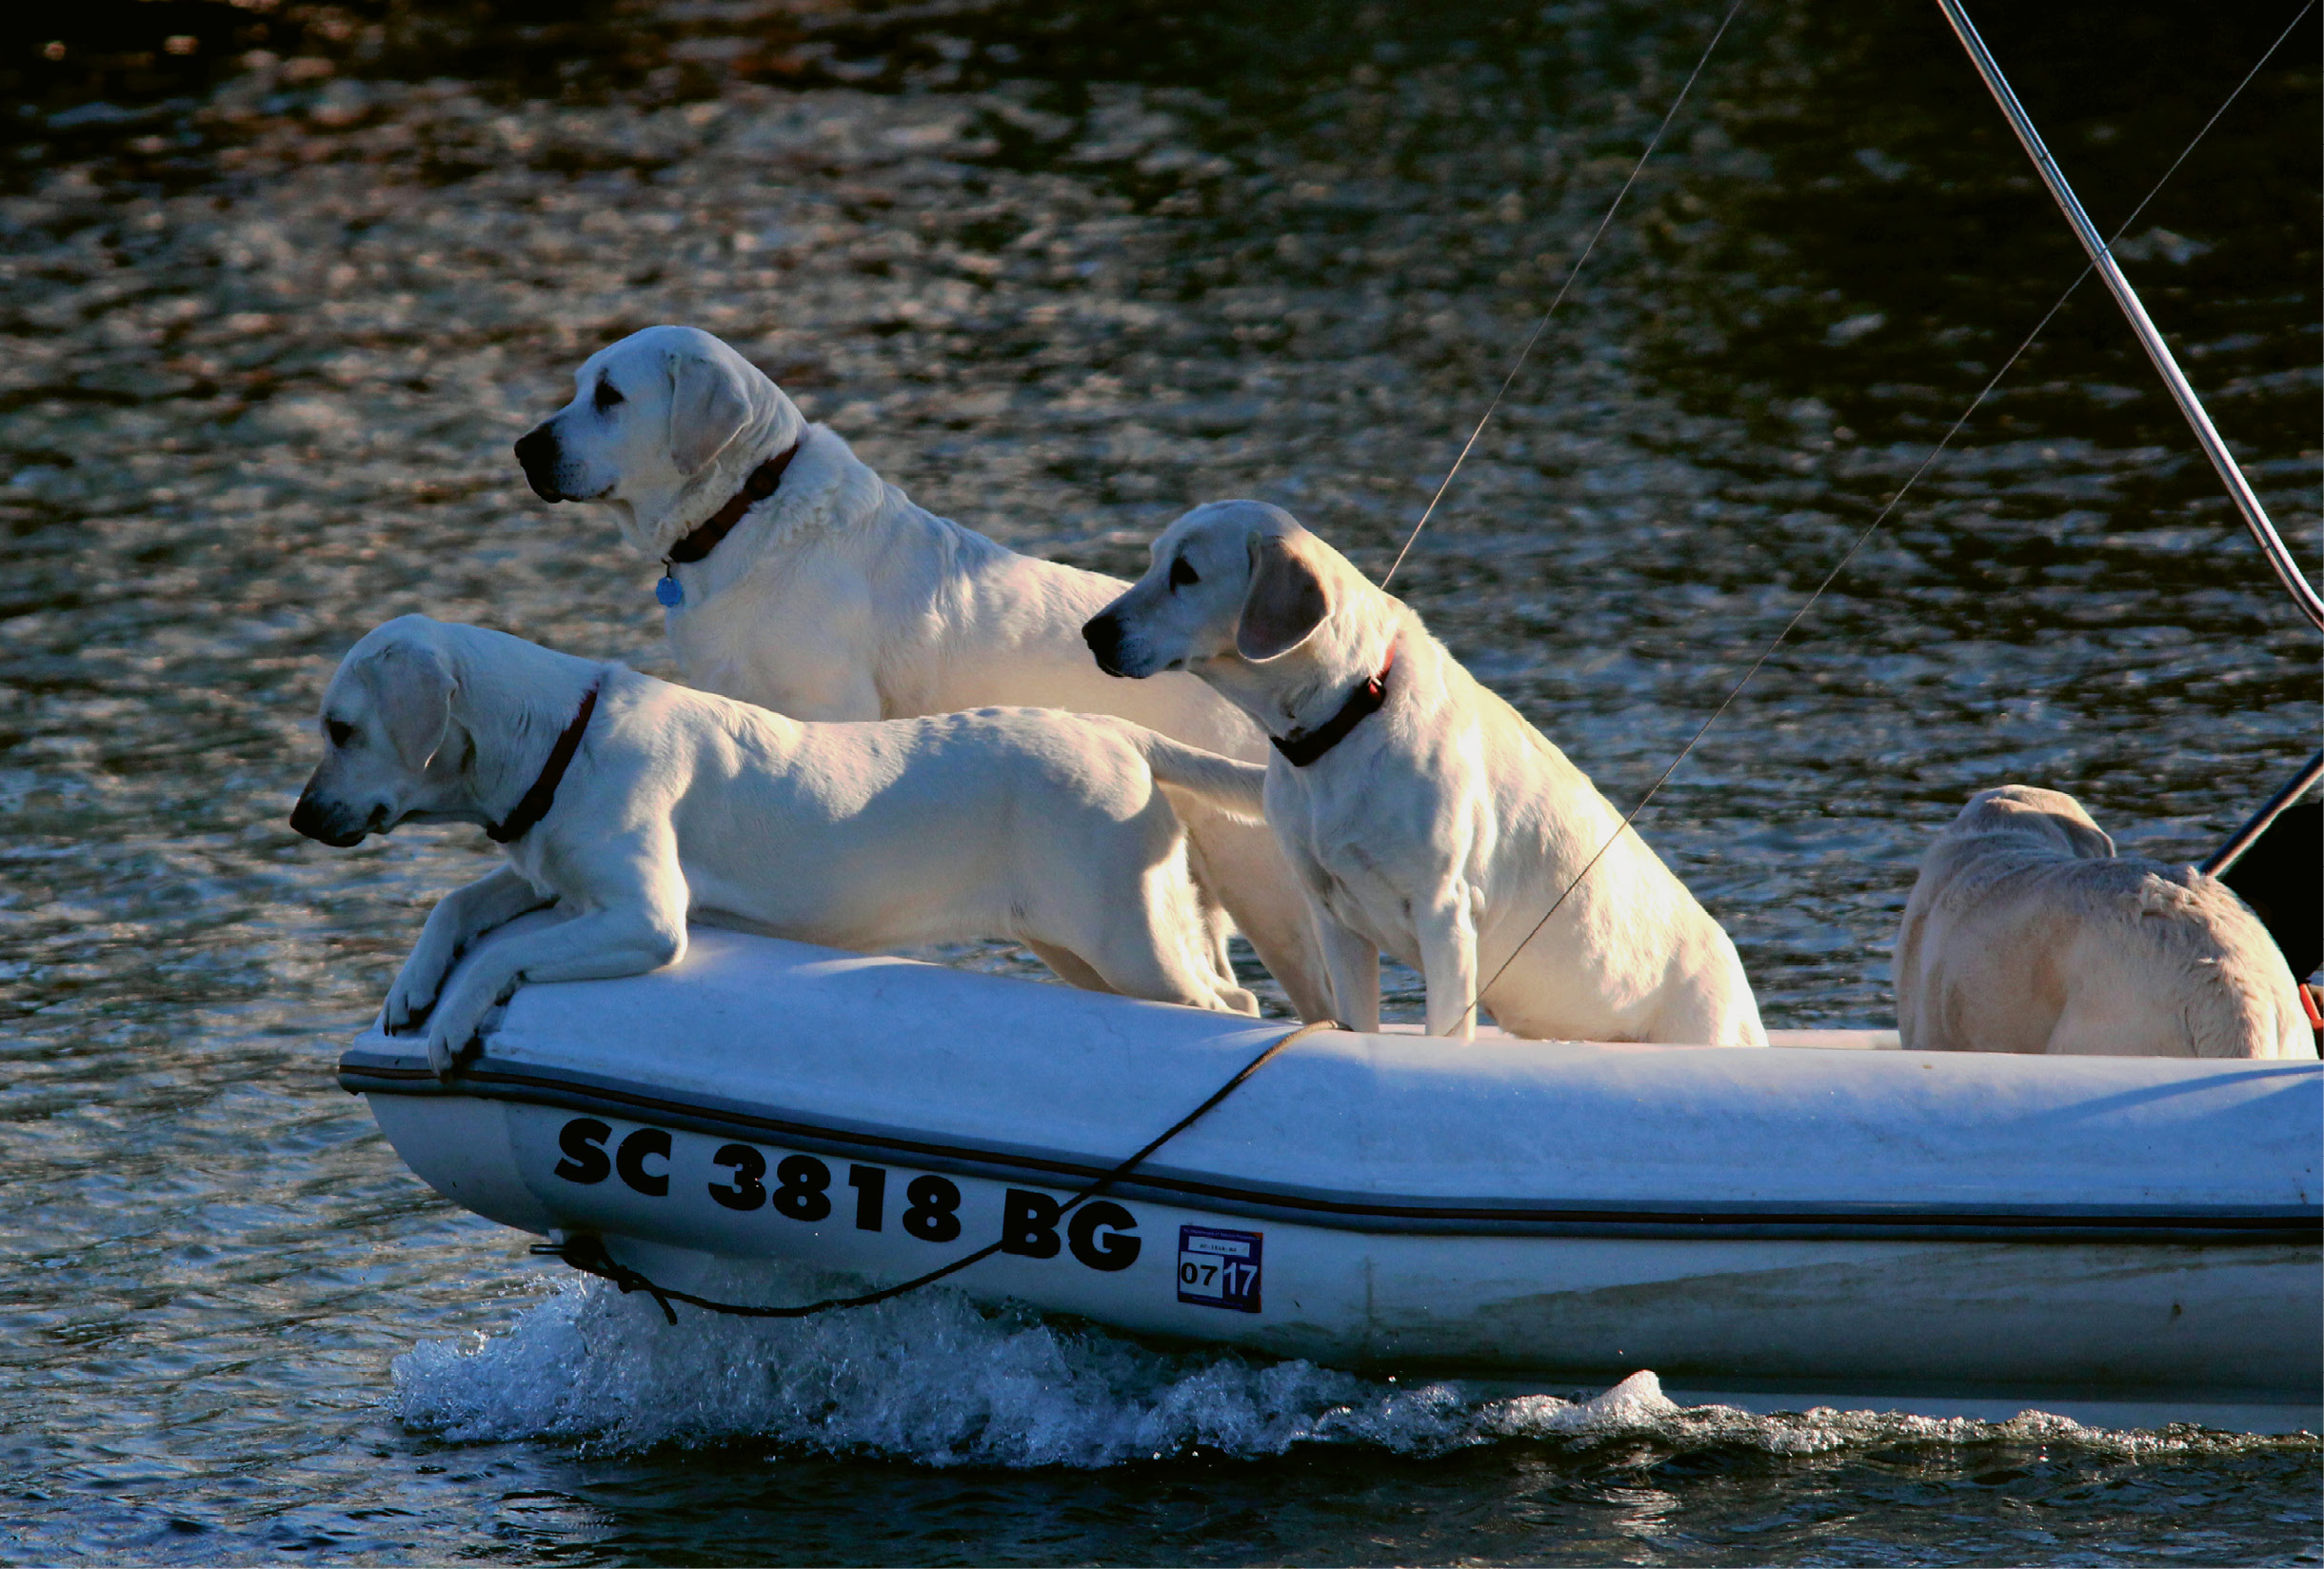 Lab-a-boat Retrievers by Harry Phillips  {Amateur category} - Captain’s best friends cruising up the Cooper River in February 2015